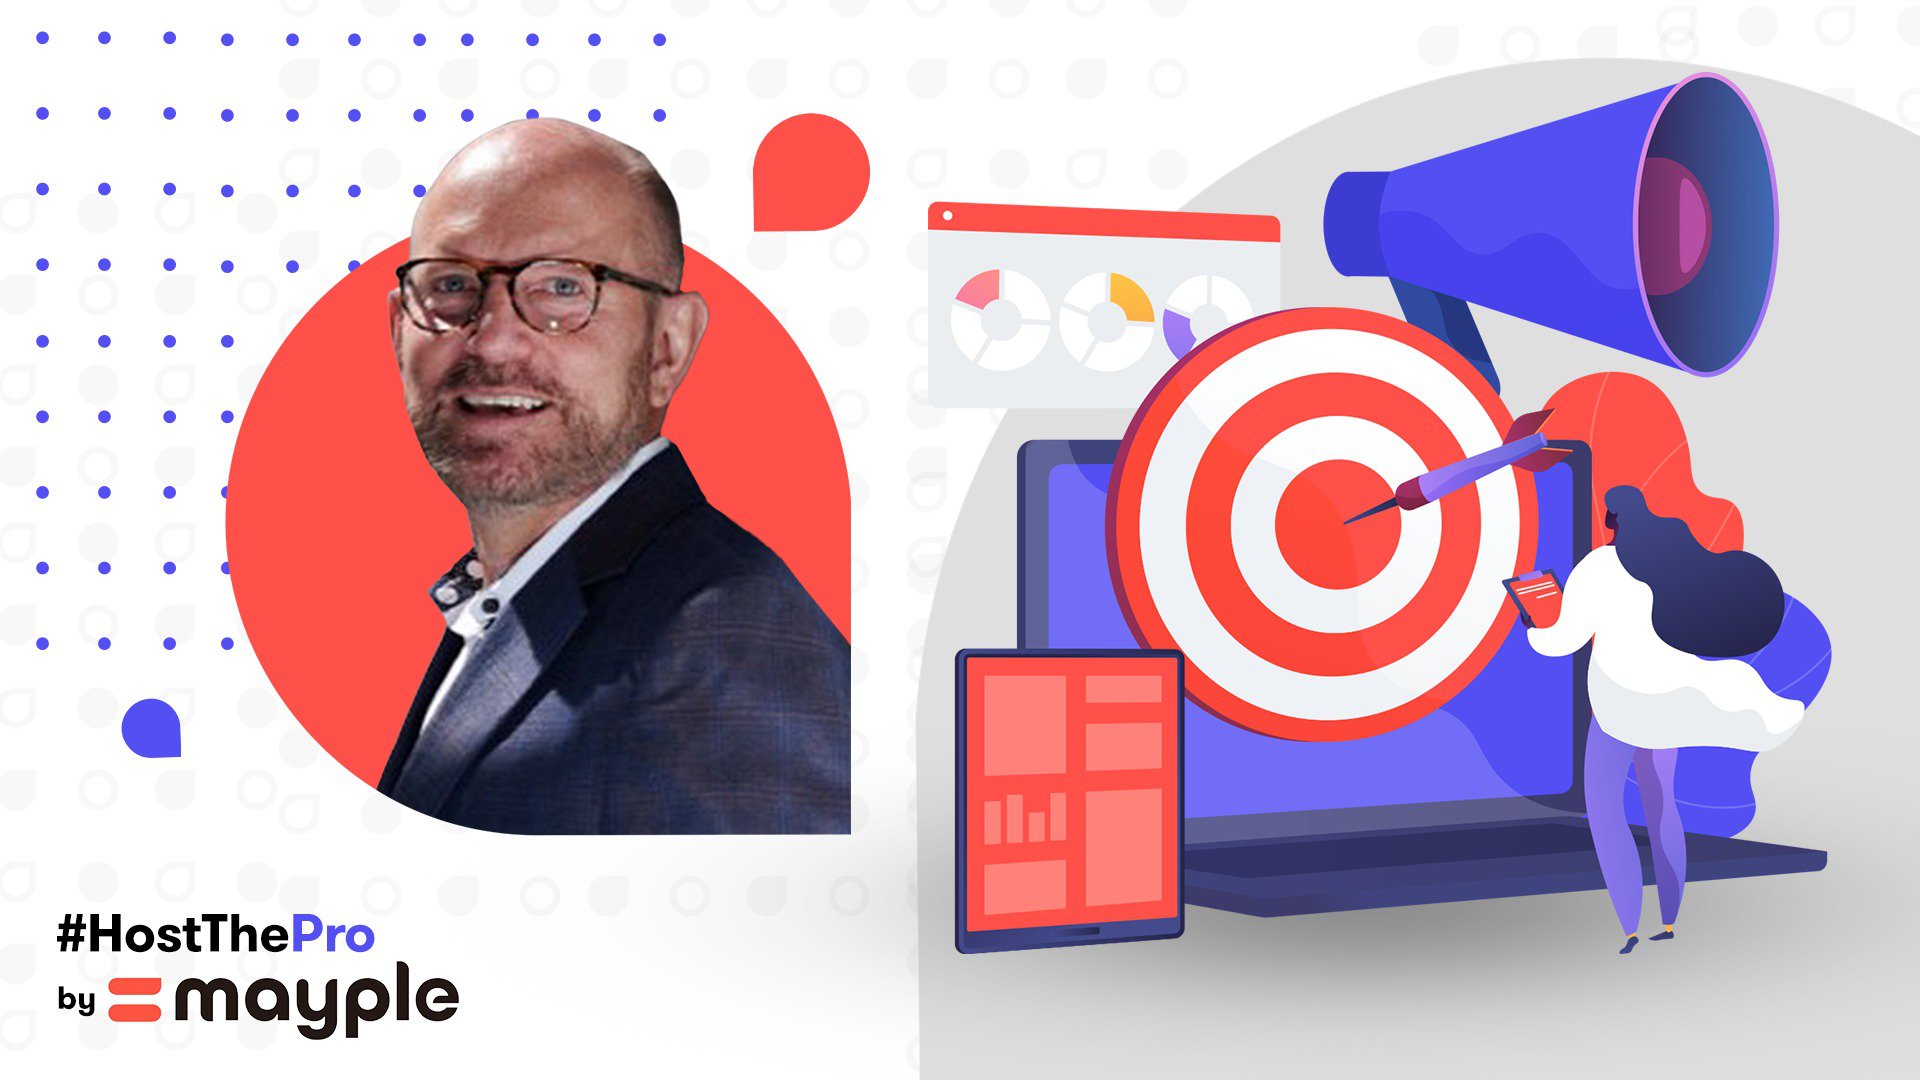 [Interview] Jamie Turner on One-to-One Marketing, Data, and Hyper-Targeting main image